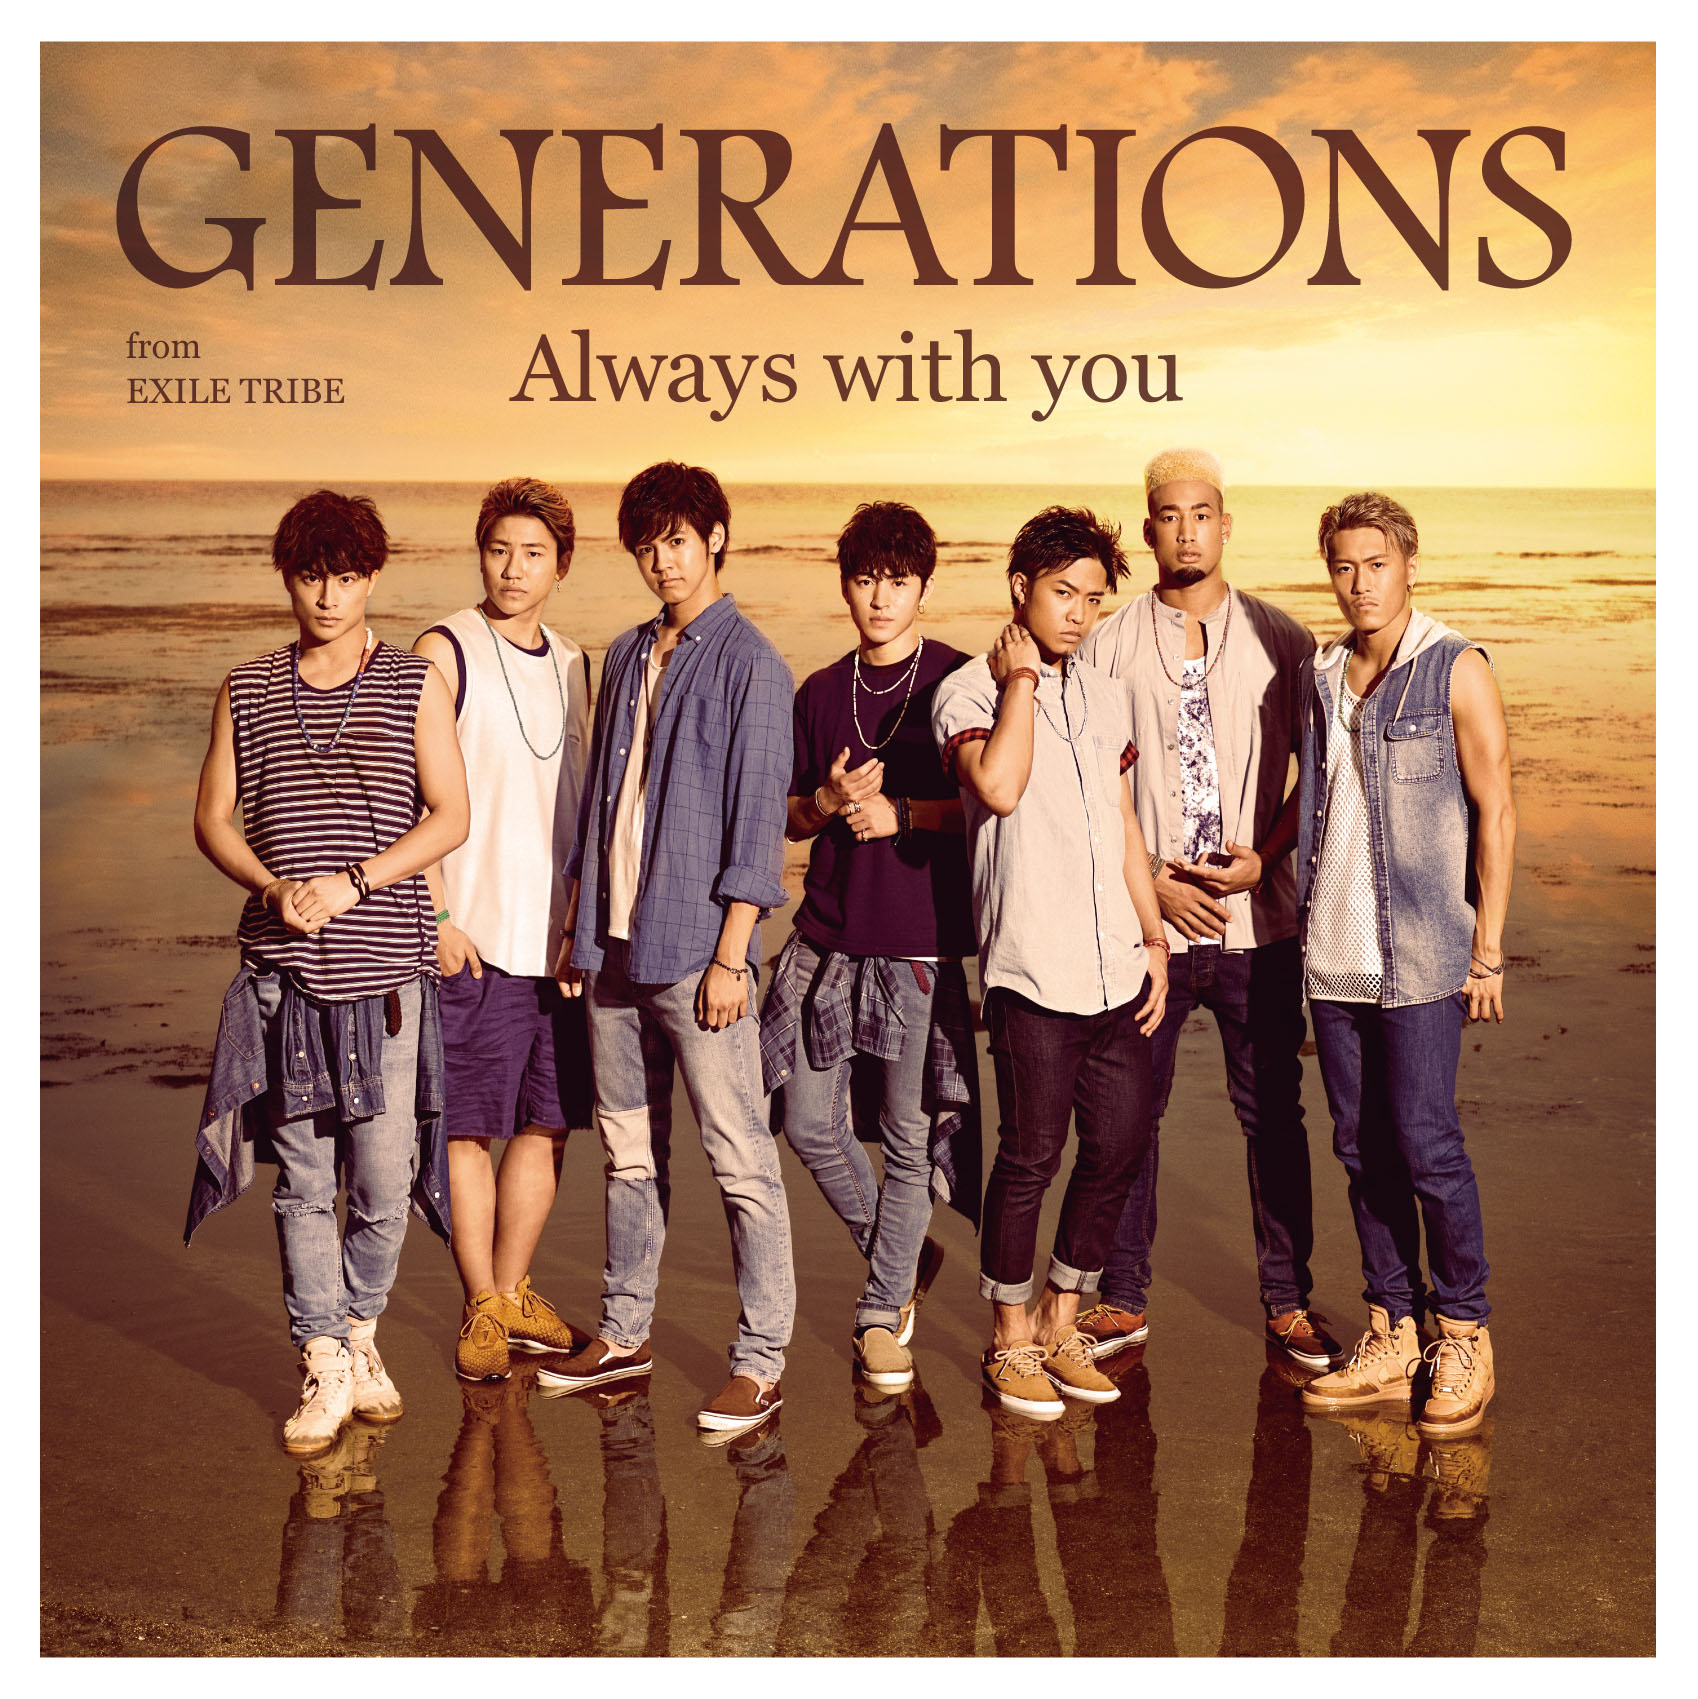 Generated always as. Generations from Exile Tribe. Exile Tribe Тецуя. Generations. Generations from Exile Tribe alan.